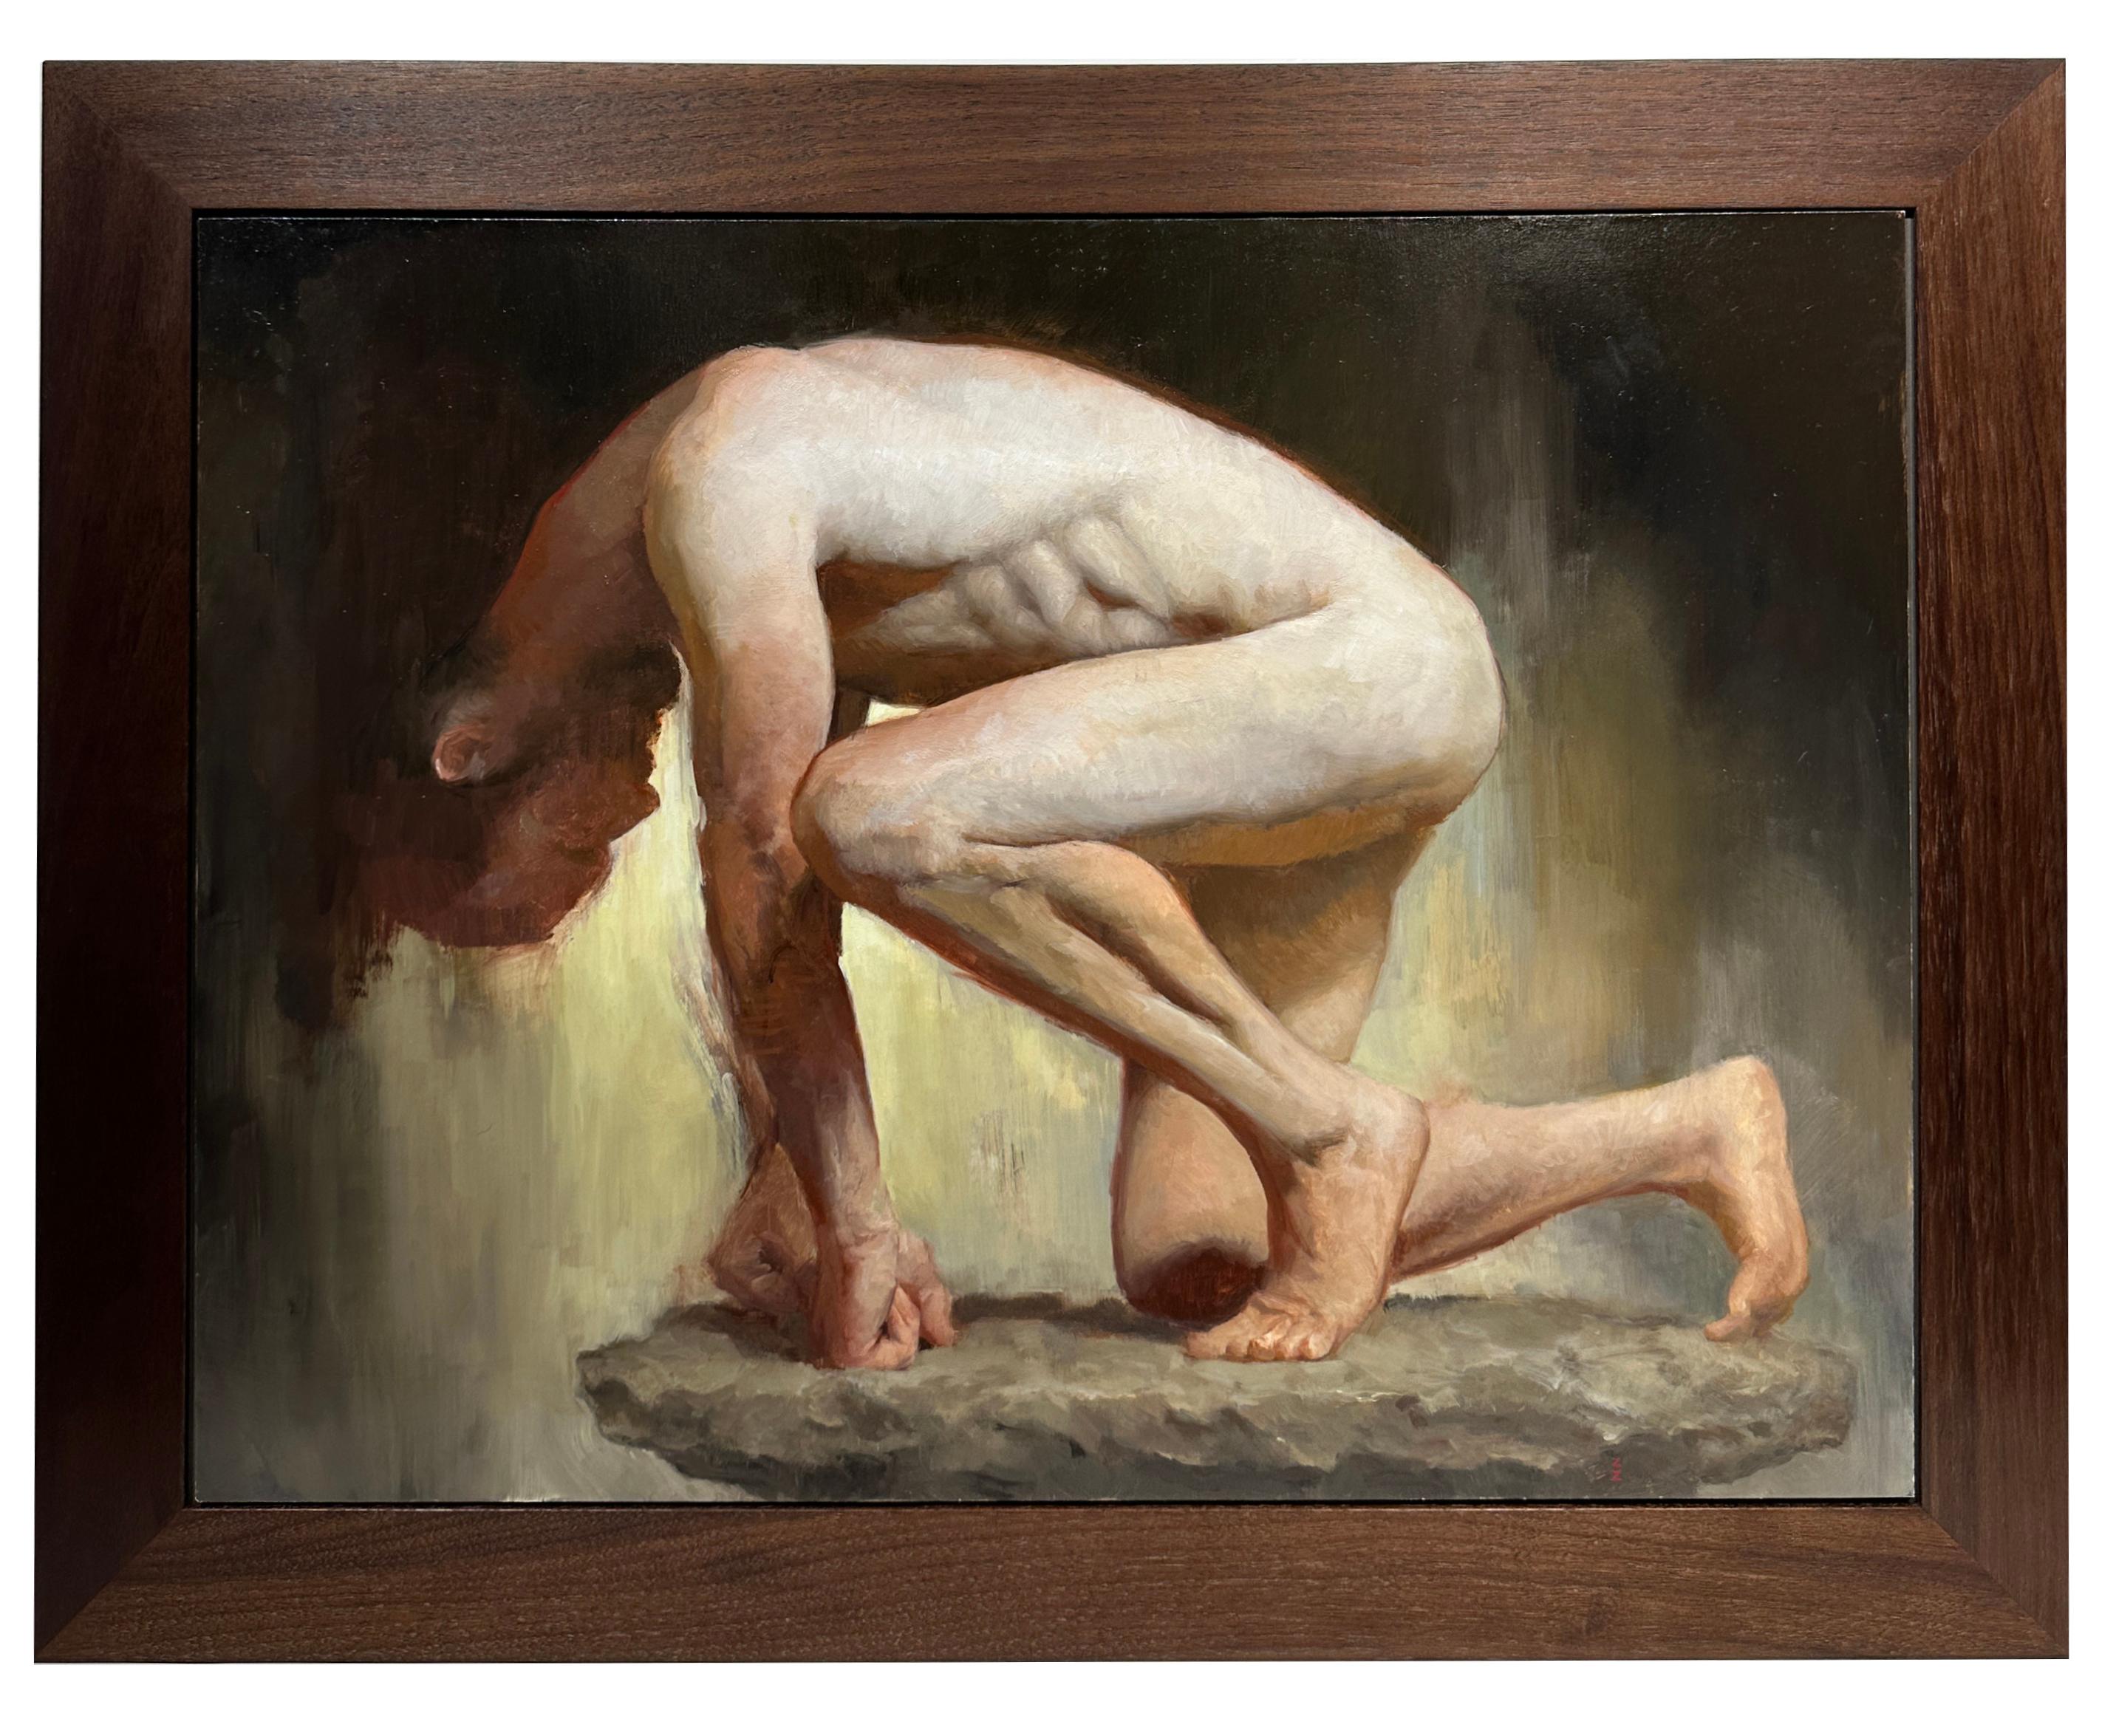 Pressure System, Male Nude Crouching on a Stone Pedestal, Original Oil on Panel - Painting by Zack Zdrale